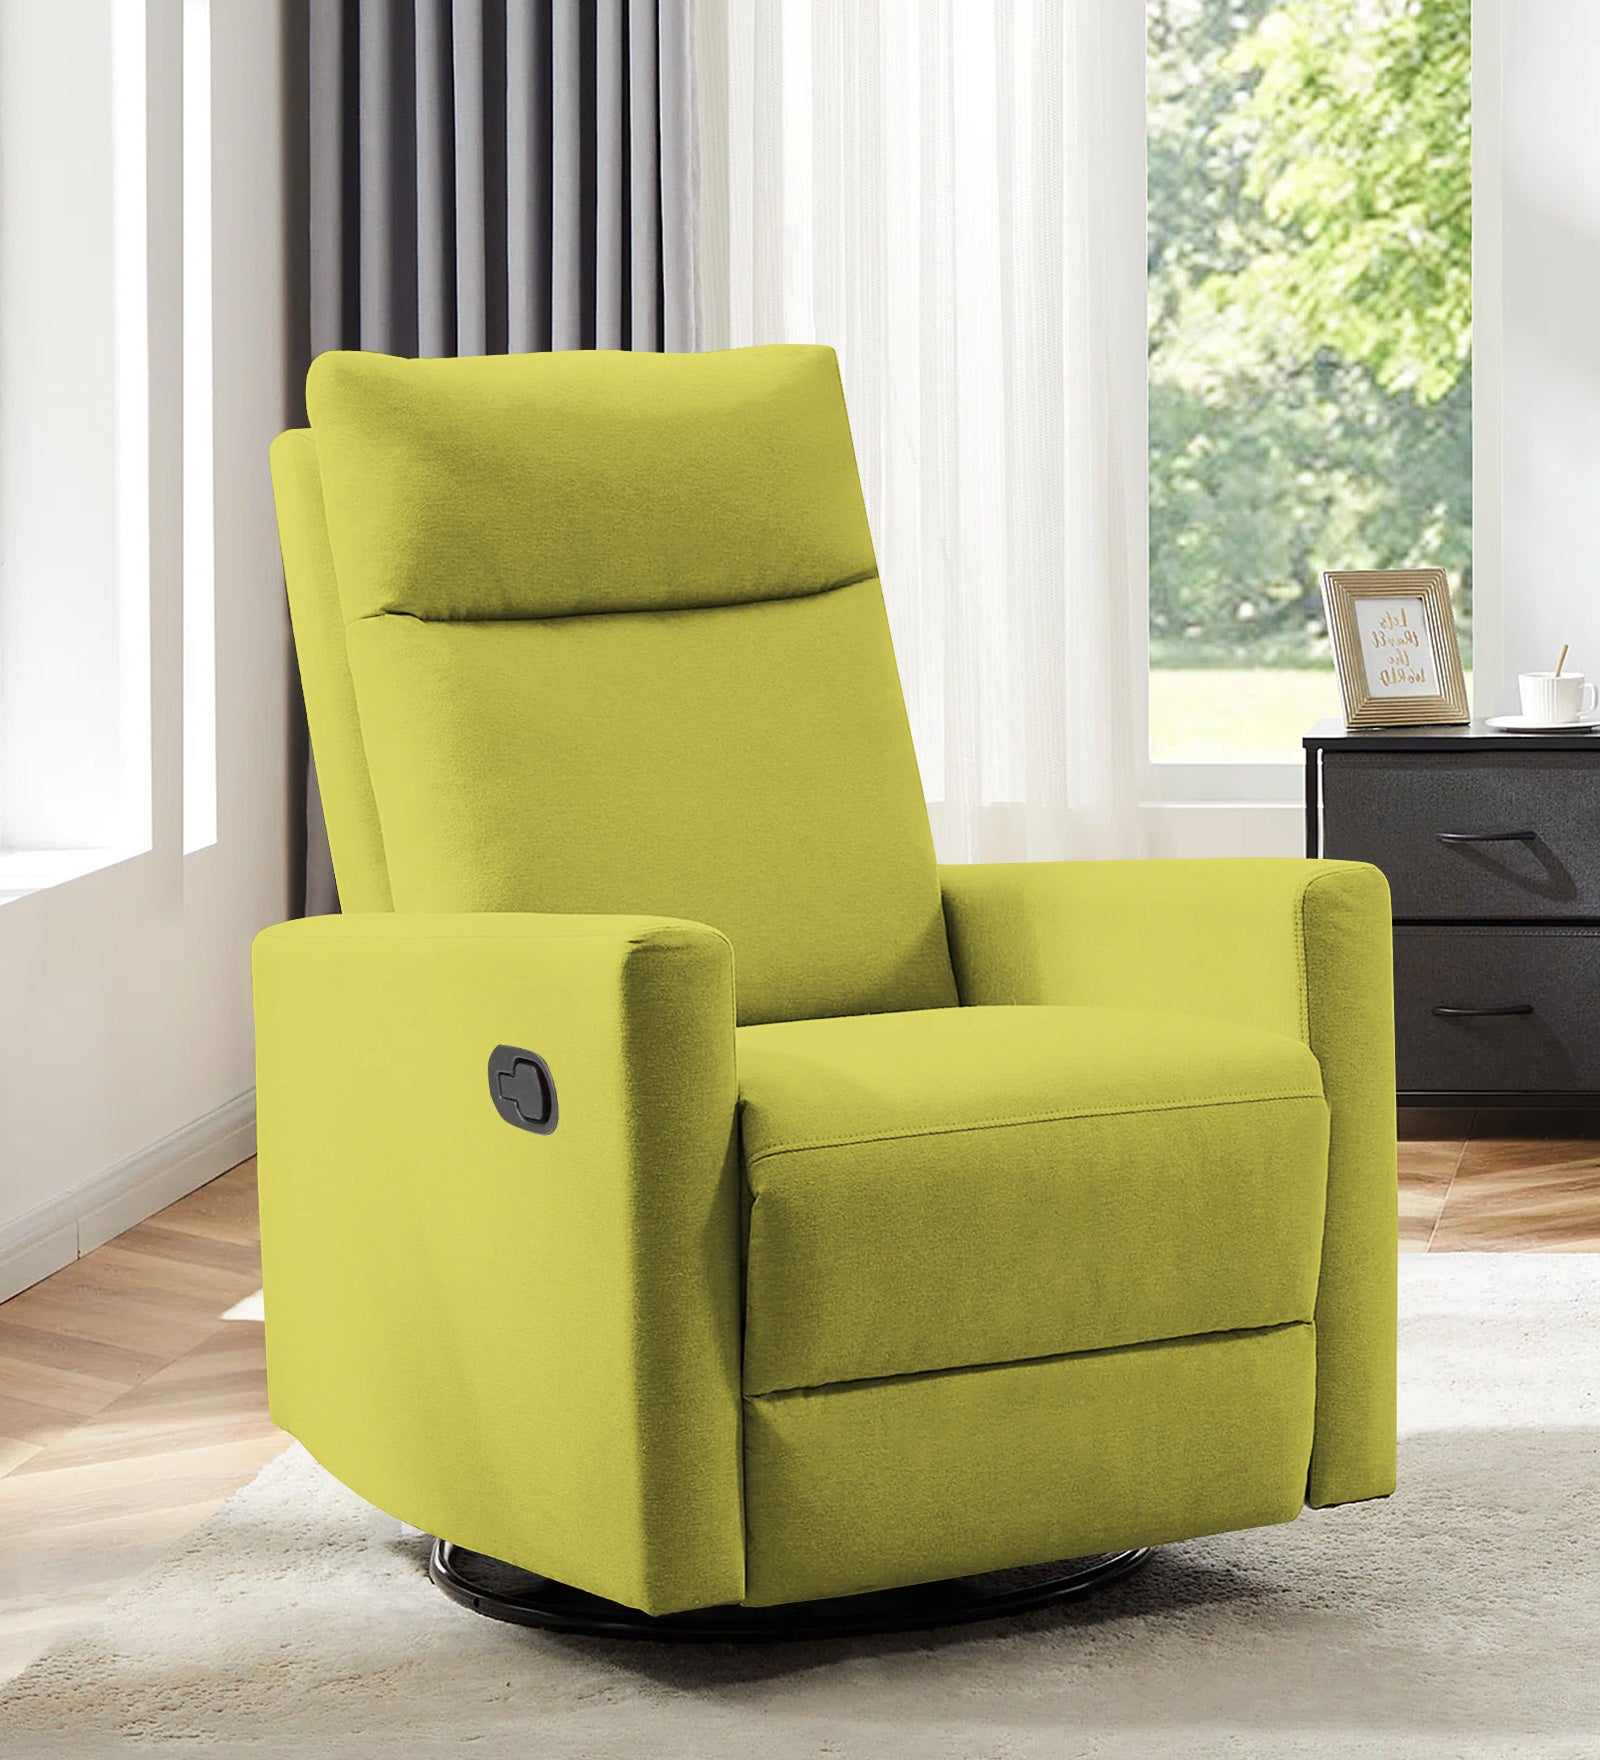 Zura Fabric Manual 1 Seater Recliner In Parrot Green Colour